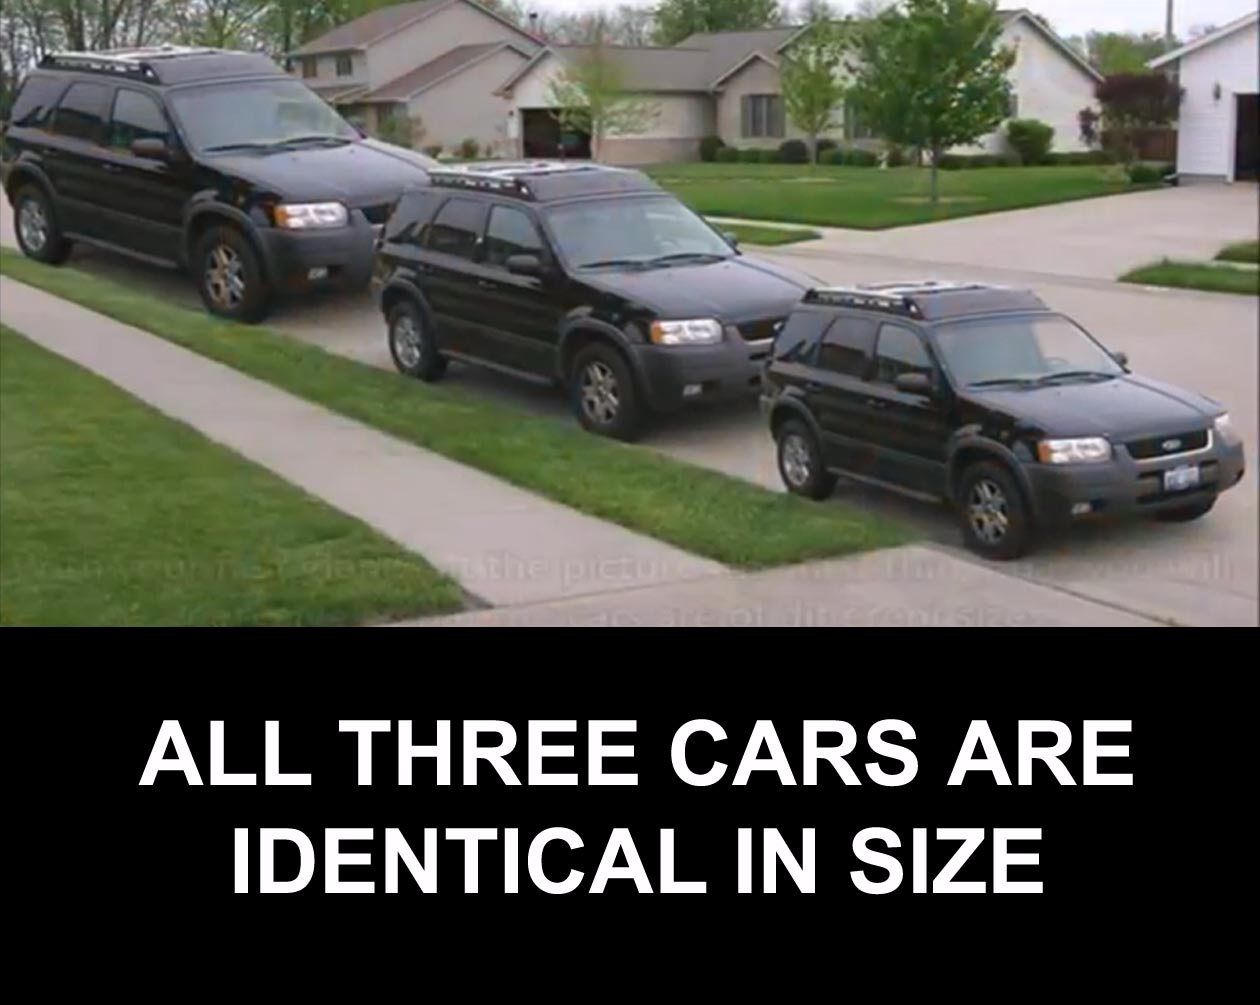 All three cars are identical in size.